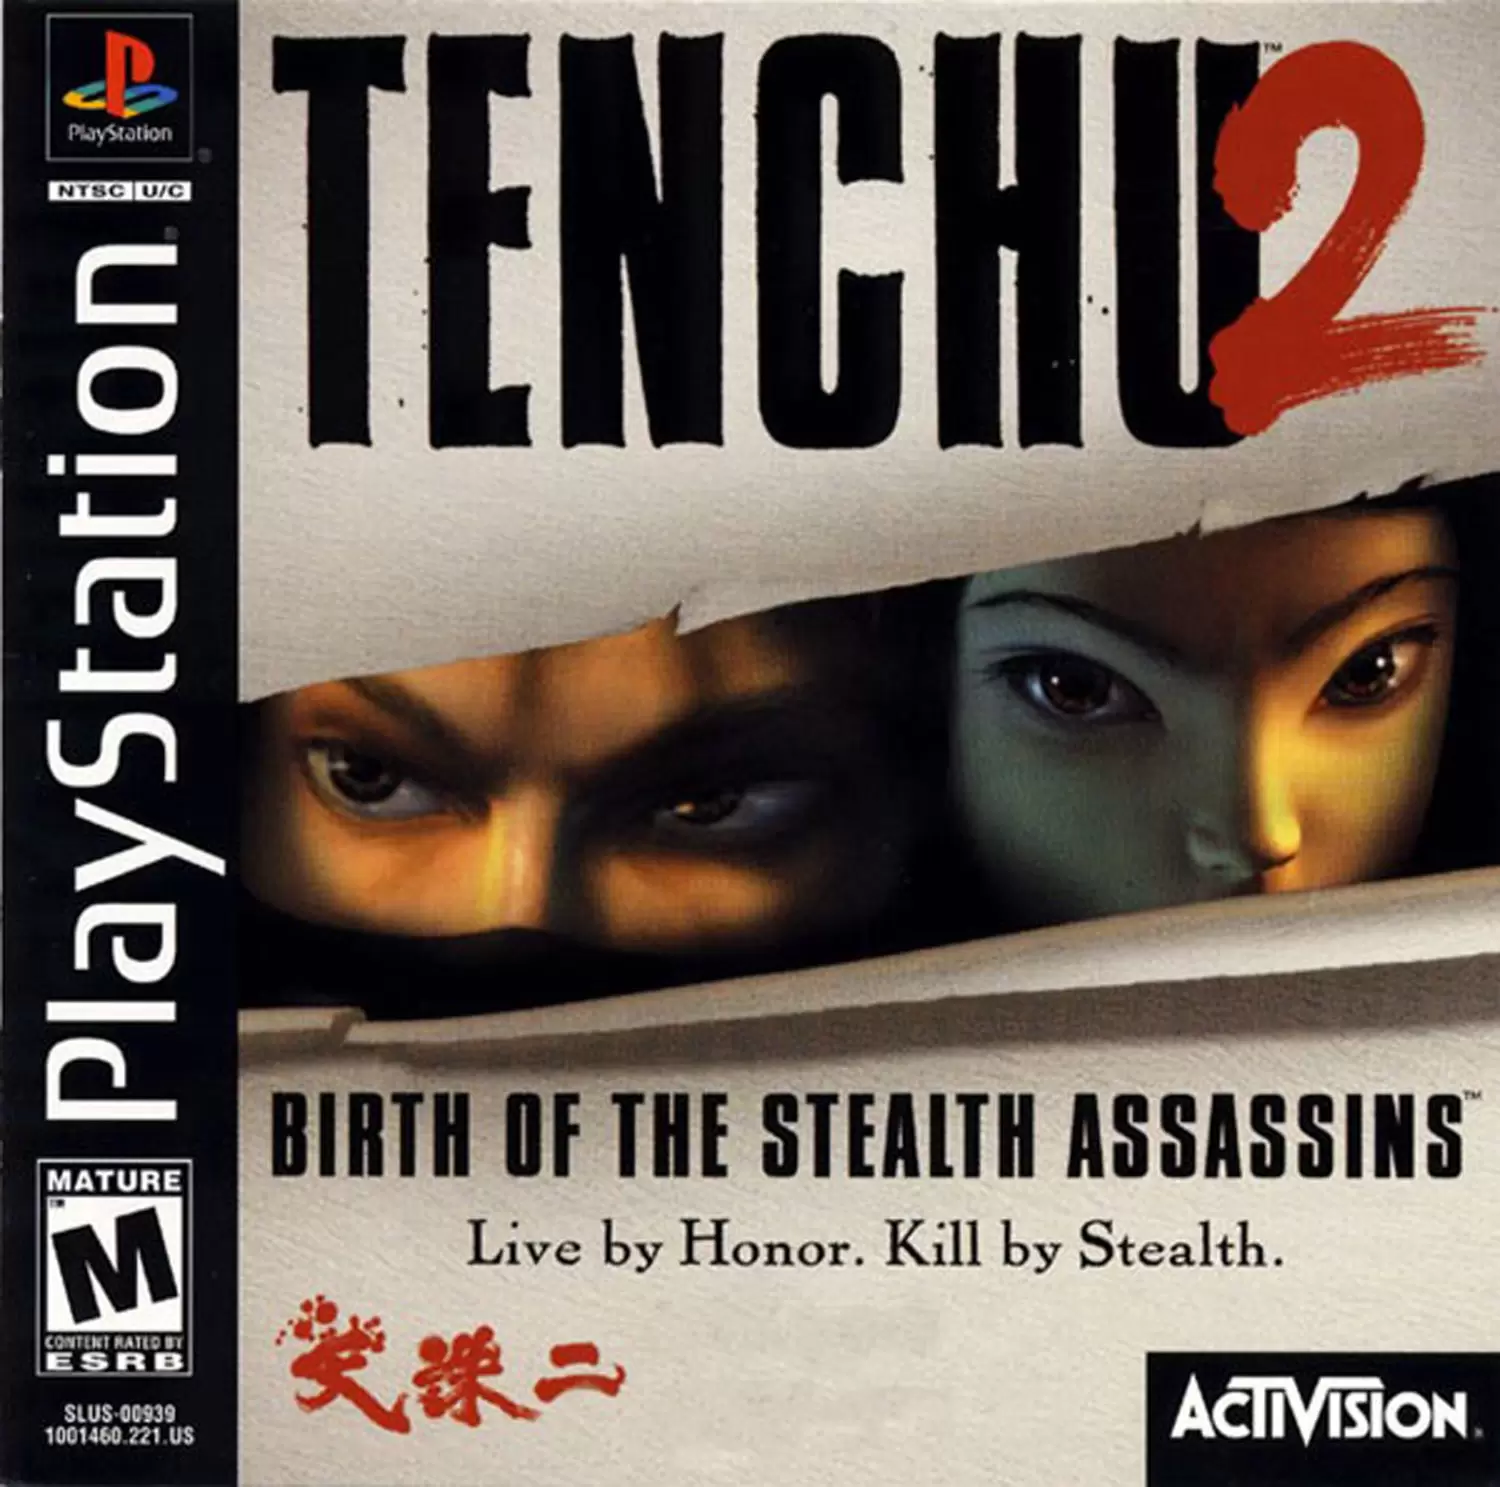 Playstation games - Tenchu 2: Birth of the Stealth Assassins